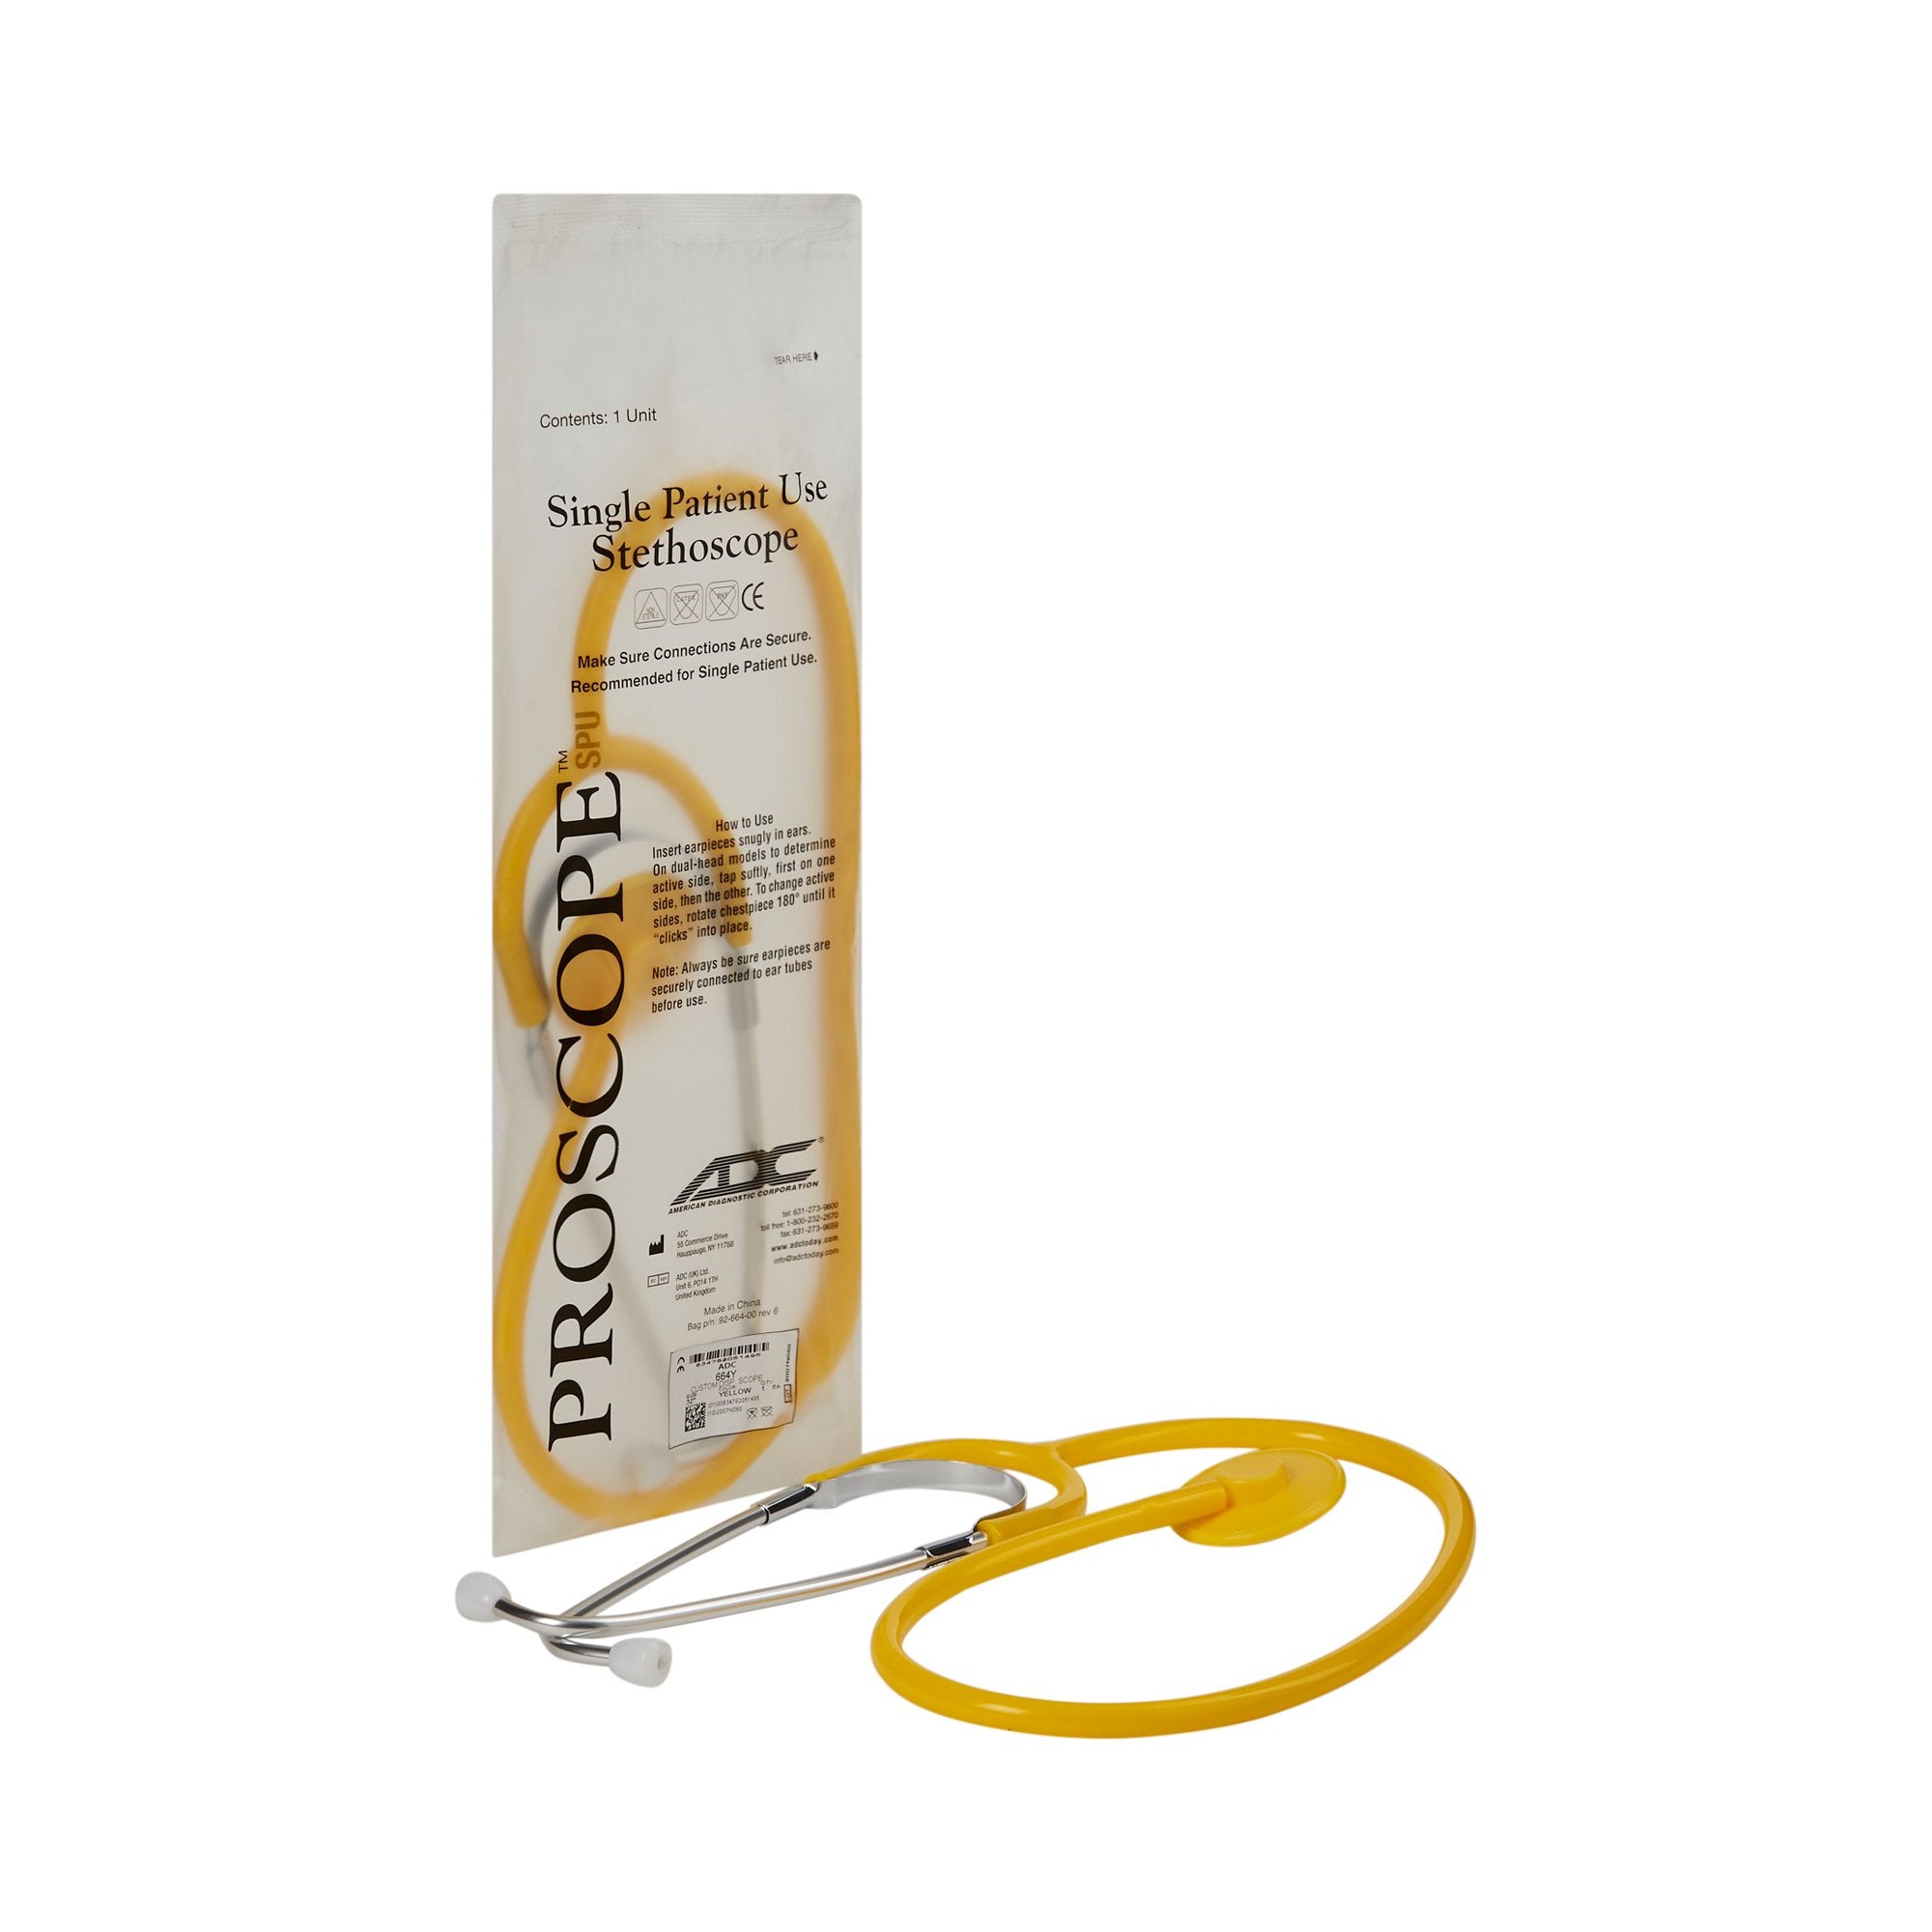 Proscope Disposable Stethoscope, Binaural, Yellow, 22" -Case of 50